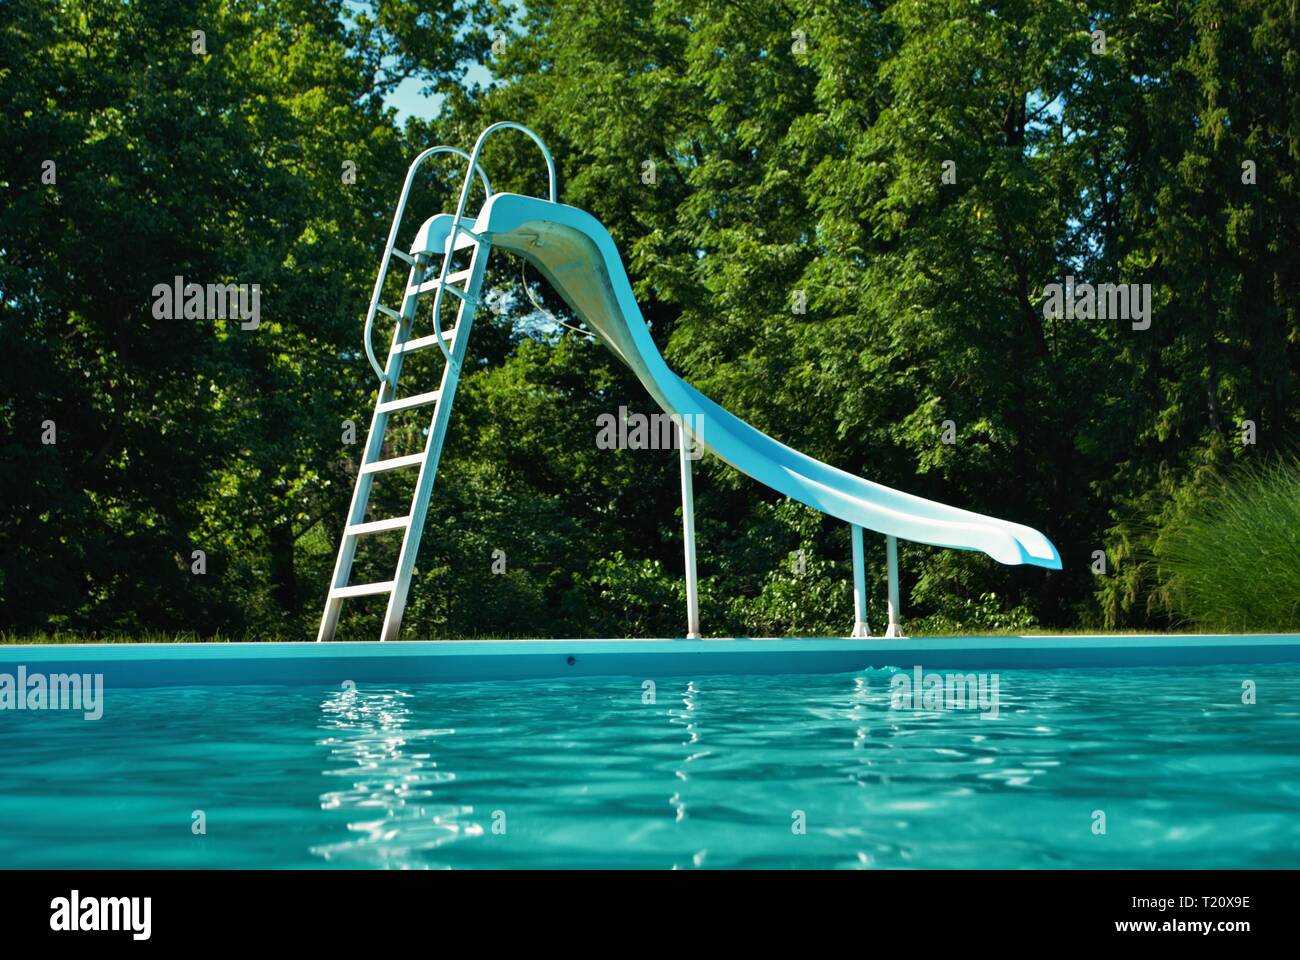 Water level view of a poolside on a bright and sunny day Stock Photo